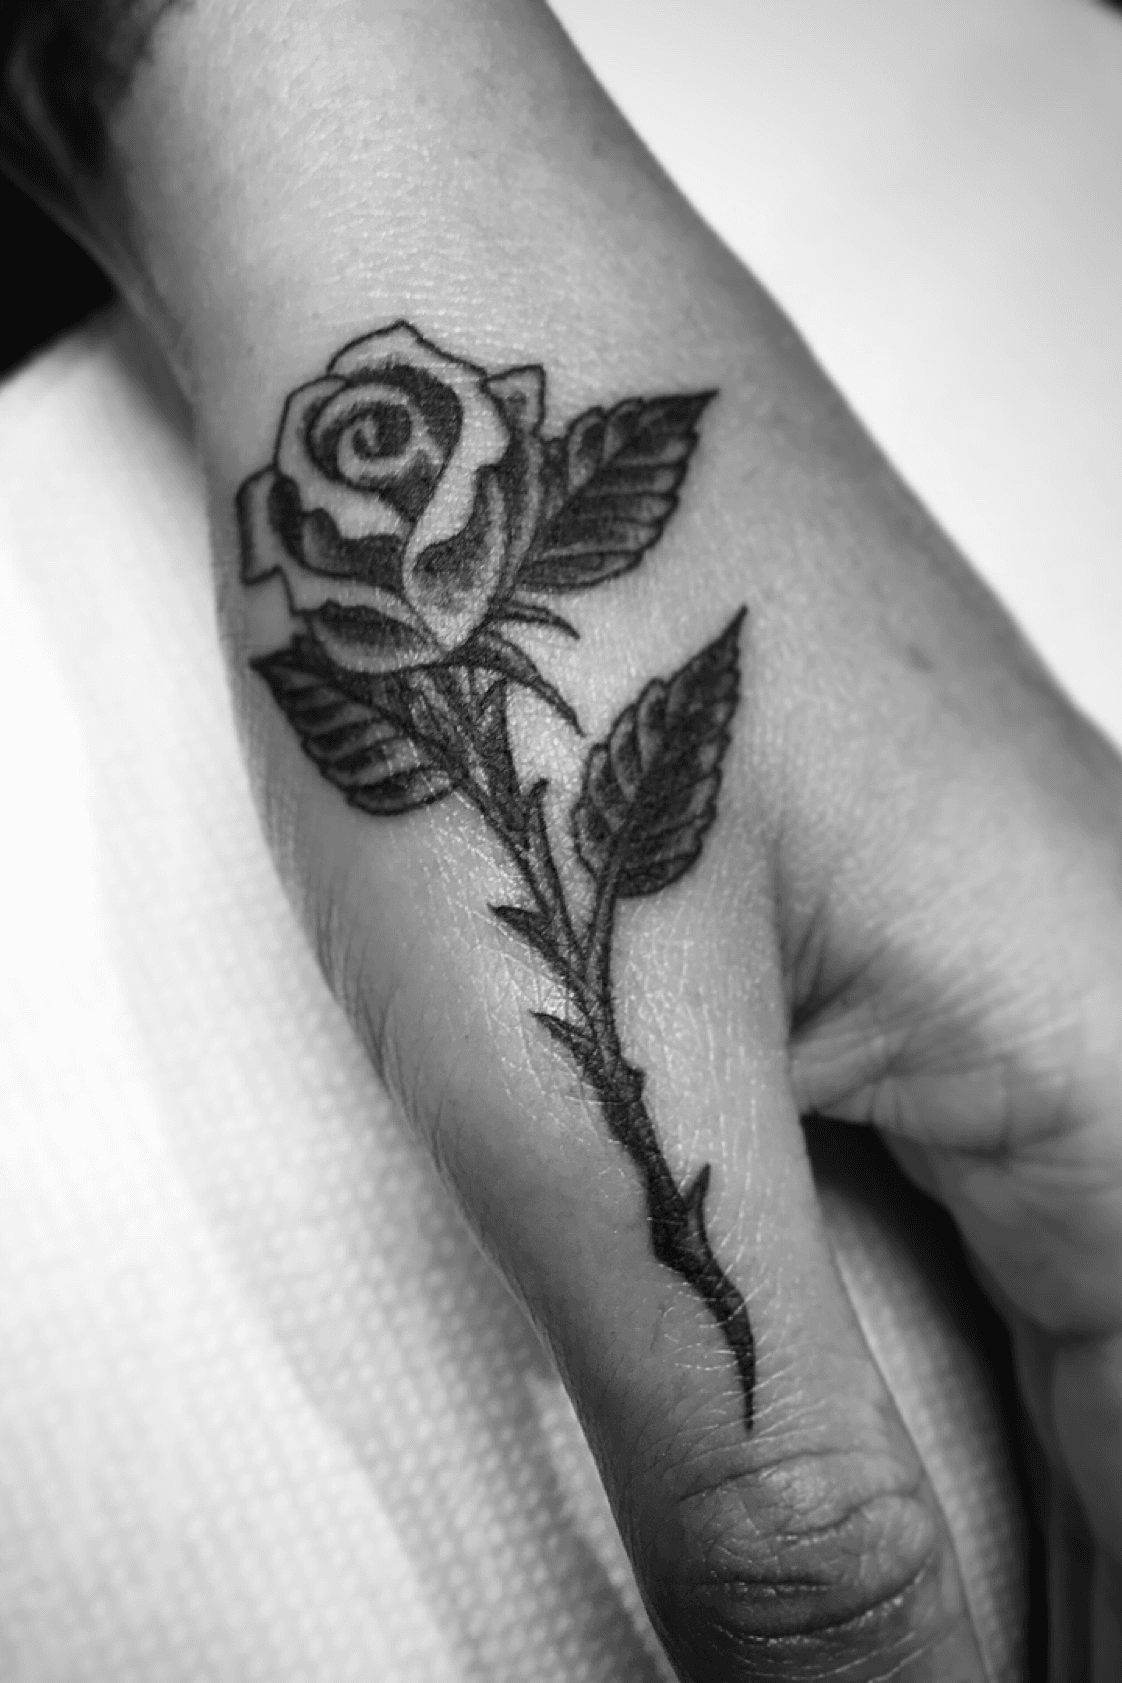 45 Romantic Rose Tattoo Ideas to try for lady beauty  Thumb tattoos Rose  tattoos Black rose tattoos